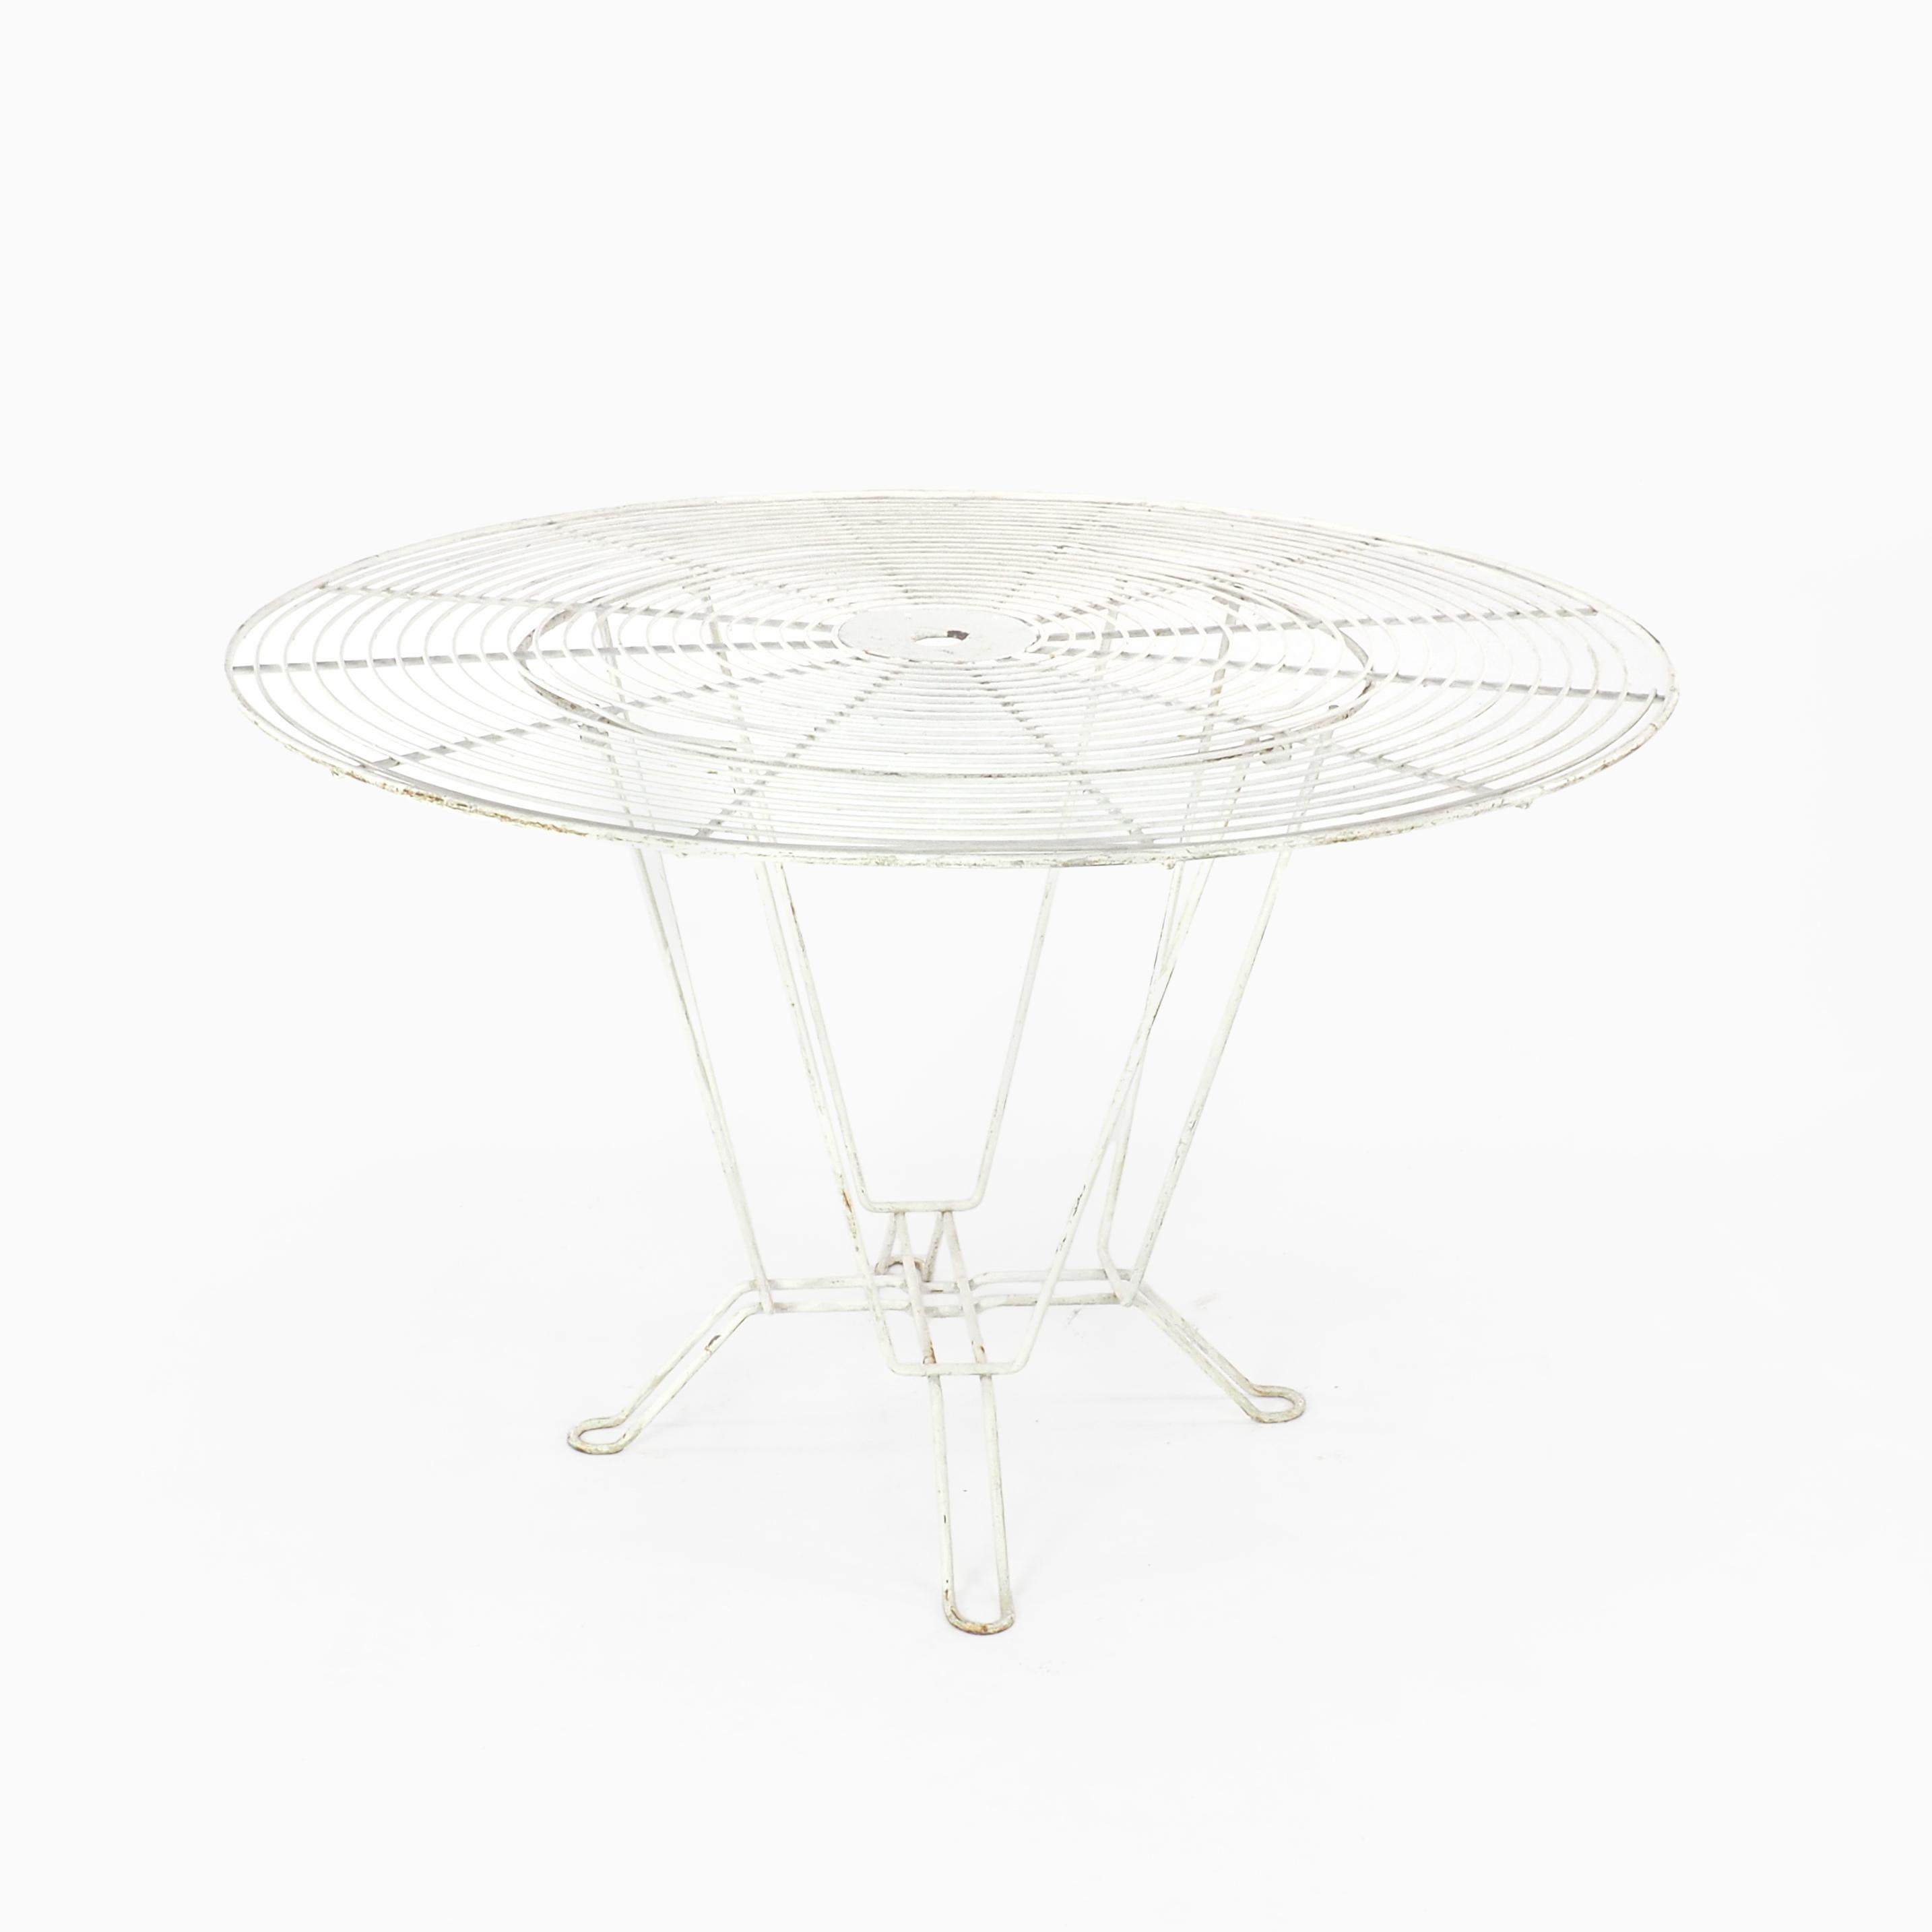 Stylish 1950s French garden table of futuristic concentric circular design with a central socket for a suitable sun shade. Perfect for poolside or patio, this table comes in original white with some rust marks consistent with age but can be dipped